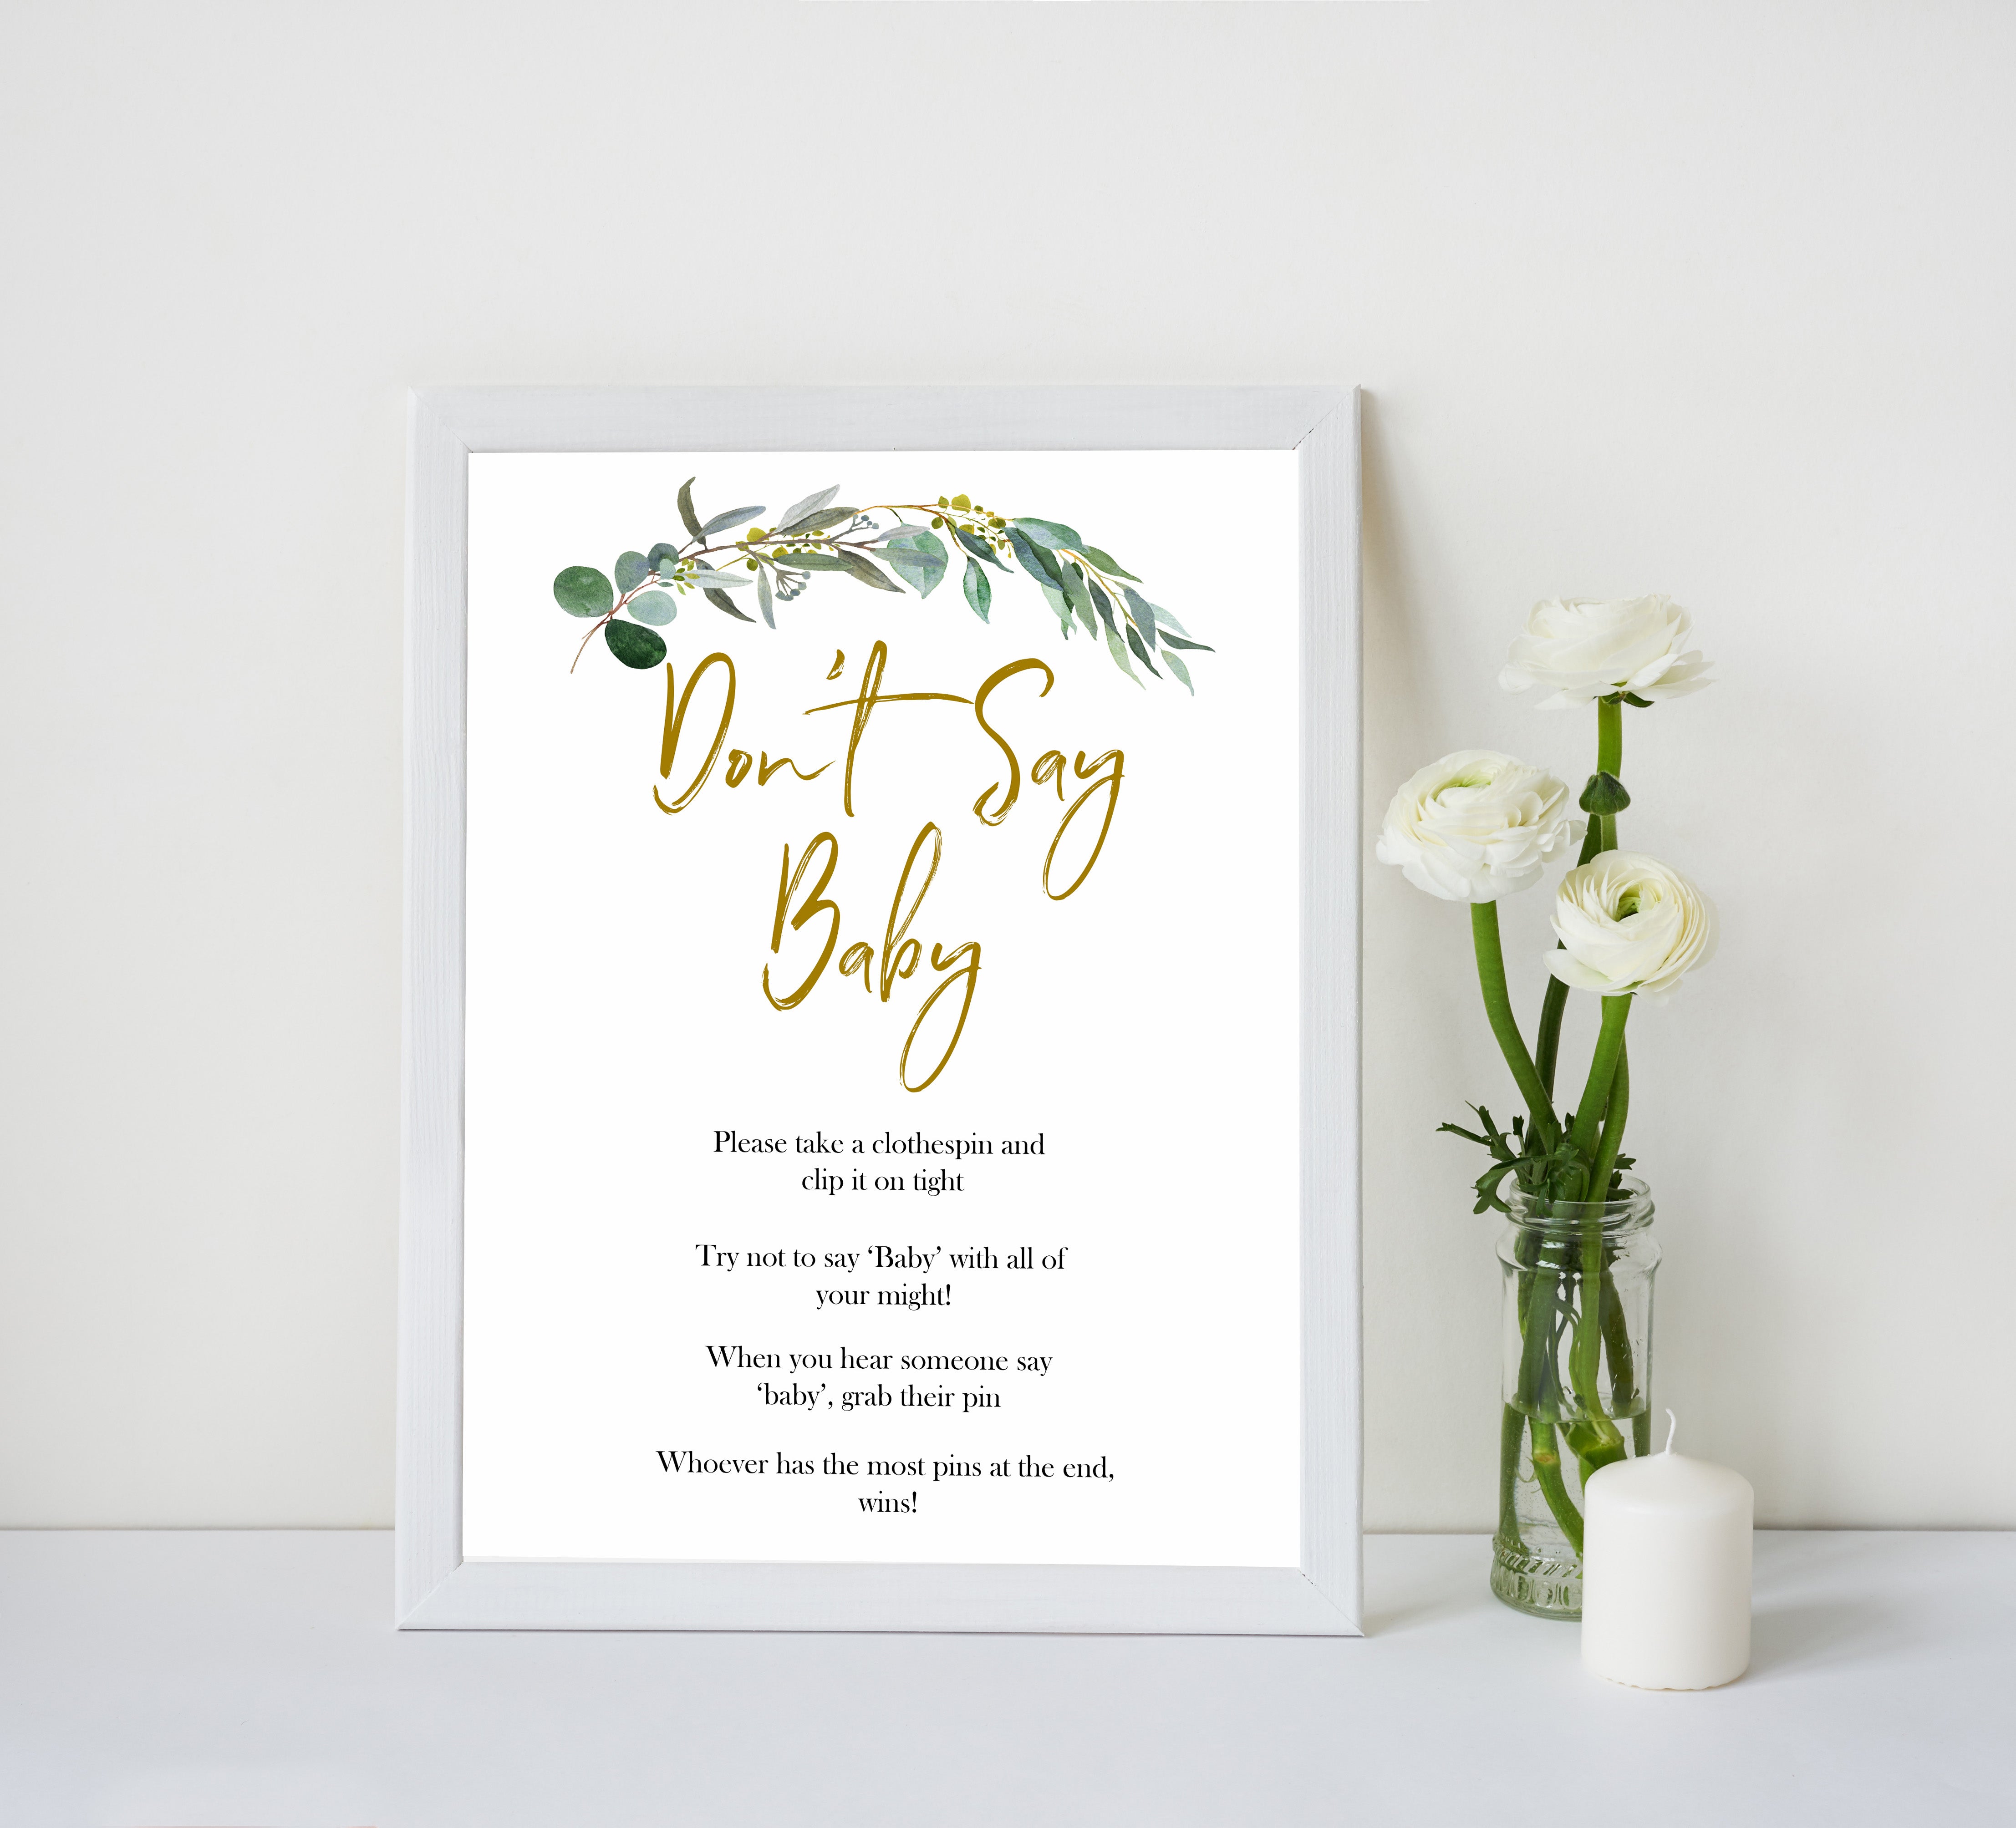 Eucalyptus baby shower games, dont say baby game baby game, fun baby shower games, printable baby games, baby shower ideas, baby games, baby shower baby shower bundle, baby shower games packs, botanical baby shower